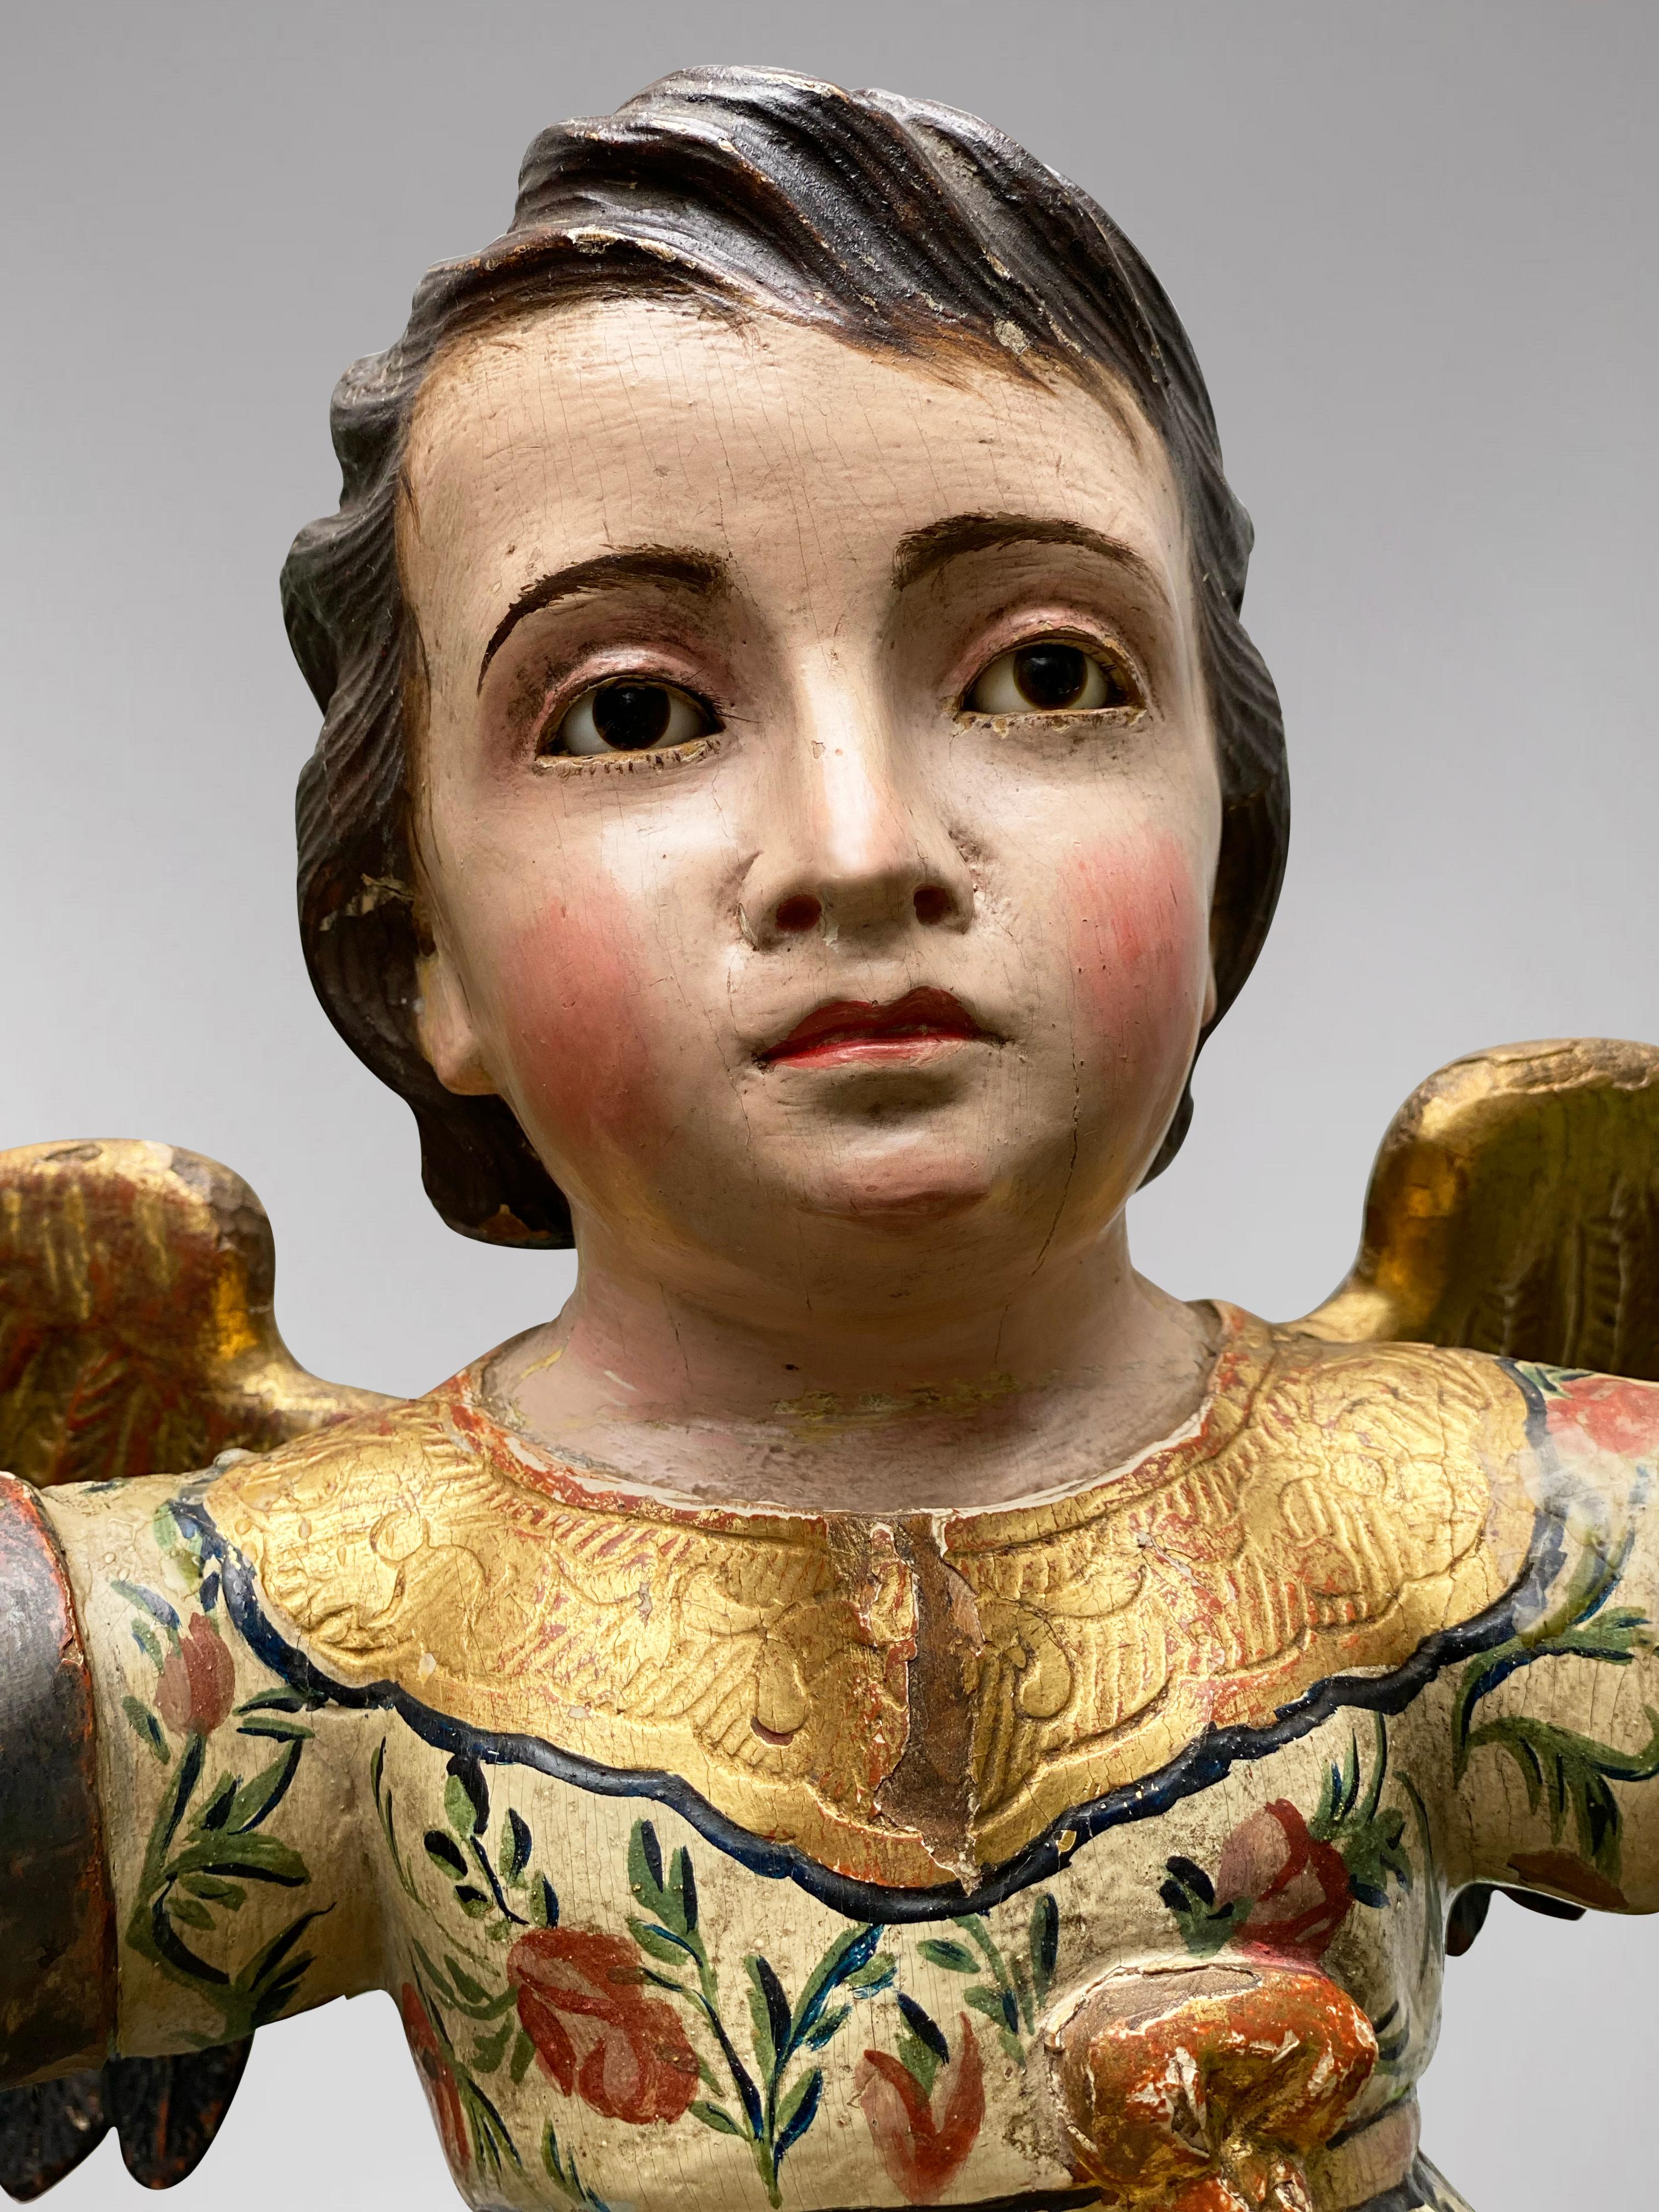 Description: A Spanish Statue of a Sitting on a Pedestal Angel with Open Arms in polychromed wood, Early 19th Century

Statue: Statue of an Angel
Object Type: Statuette
Artist, Sculptor / Maker: Unknown
Place of Origin: Spain
Period: Early 19th